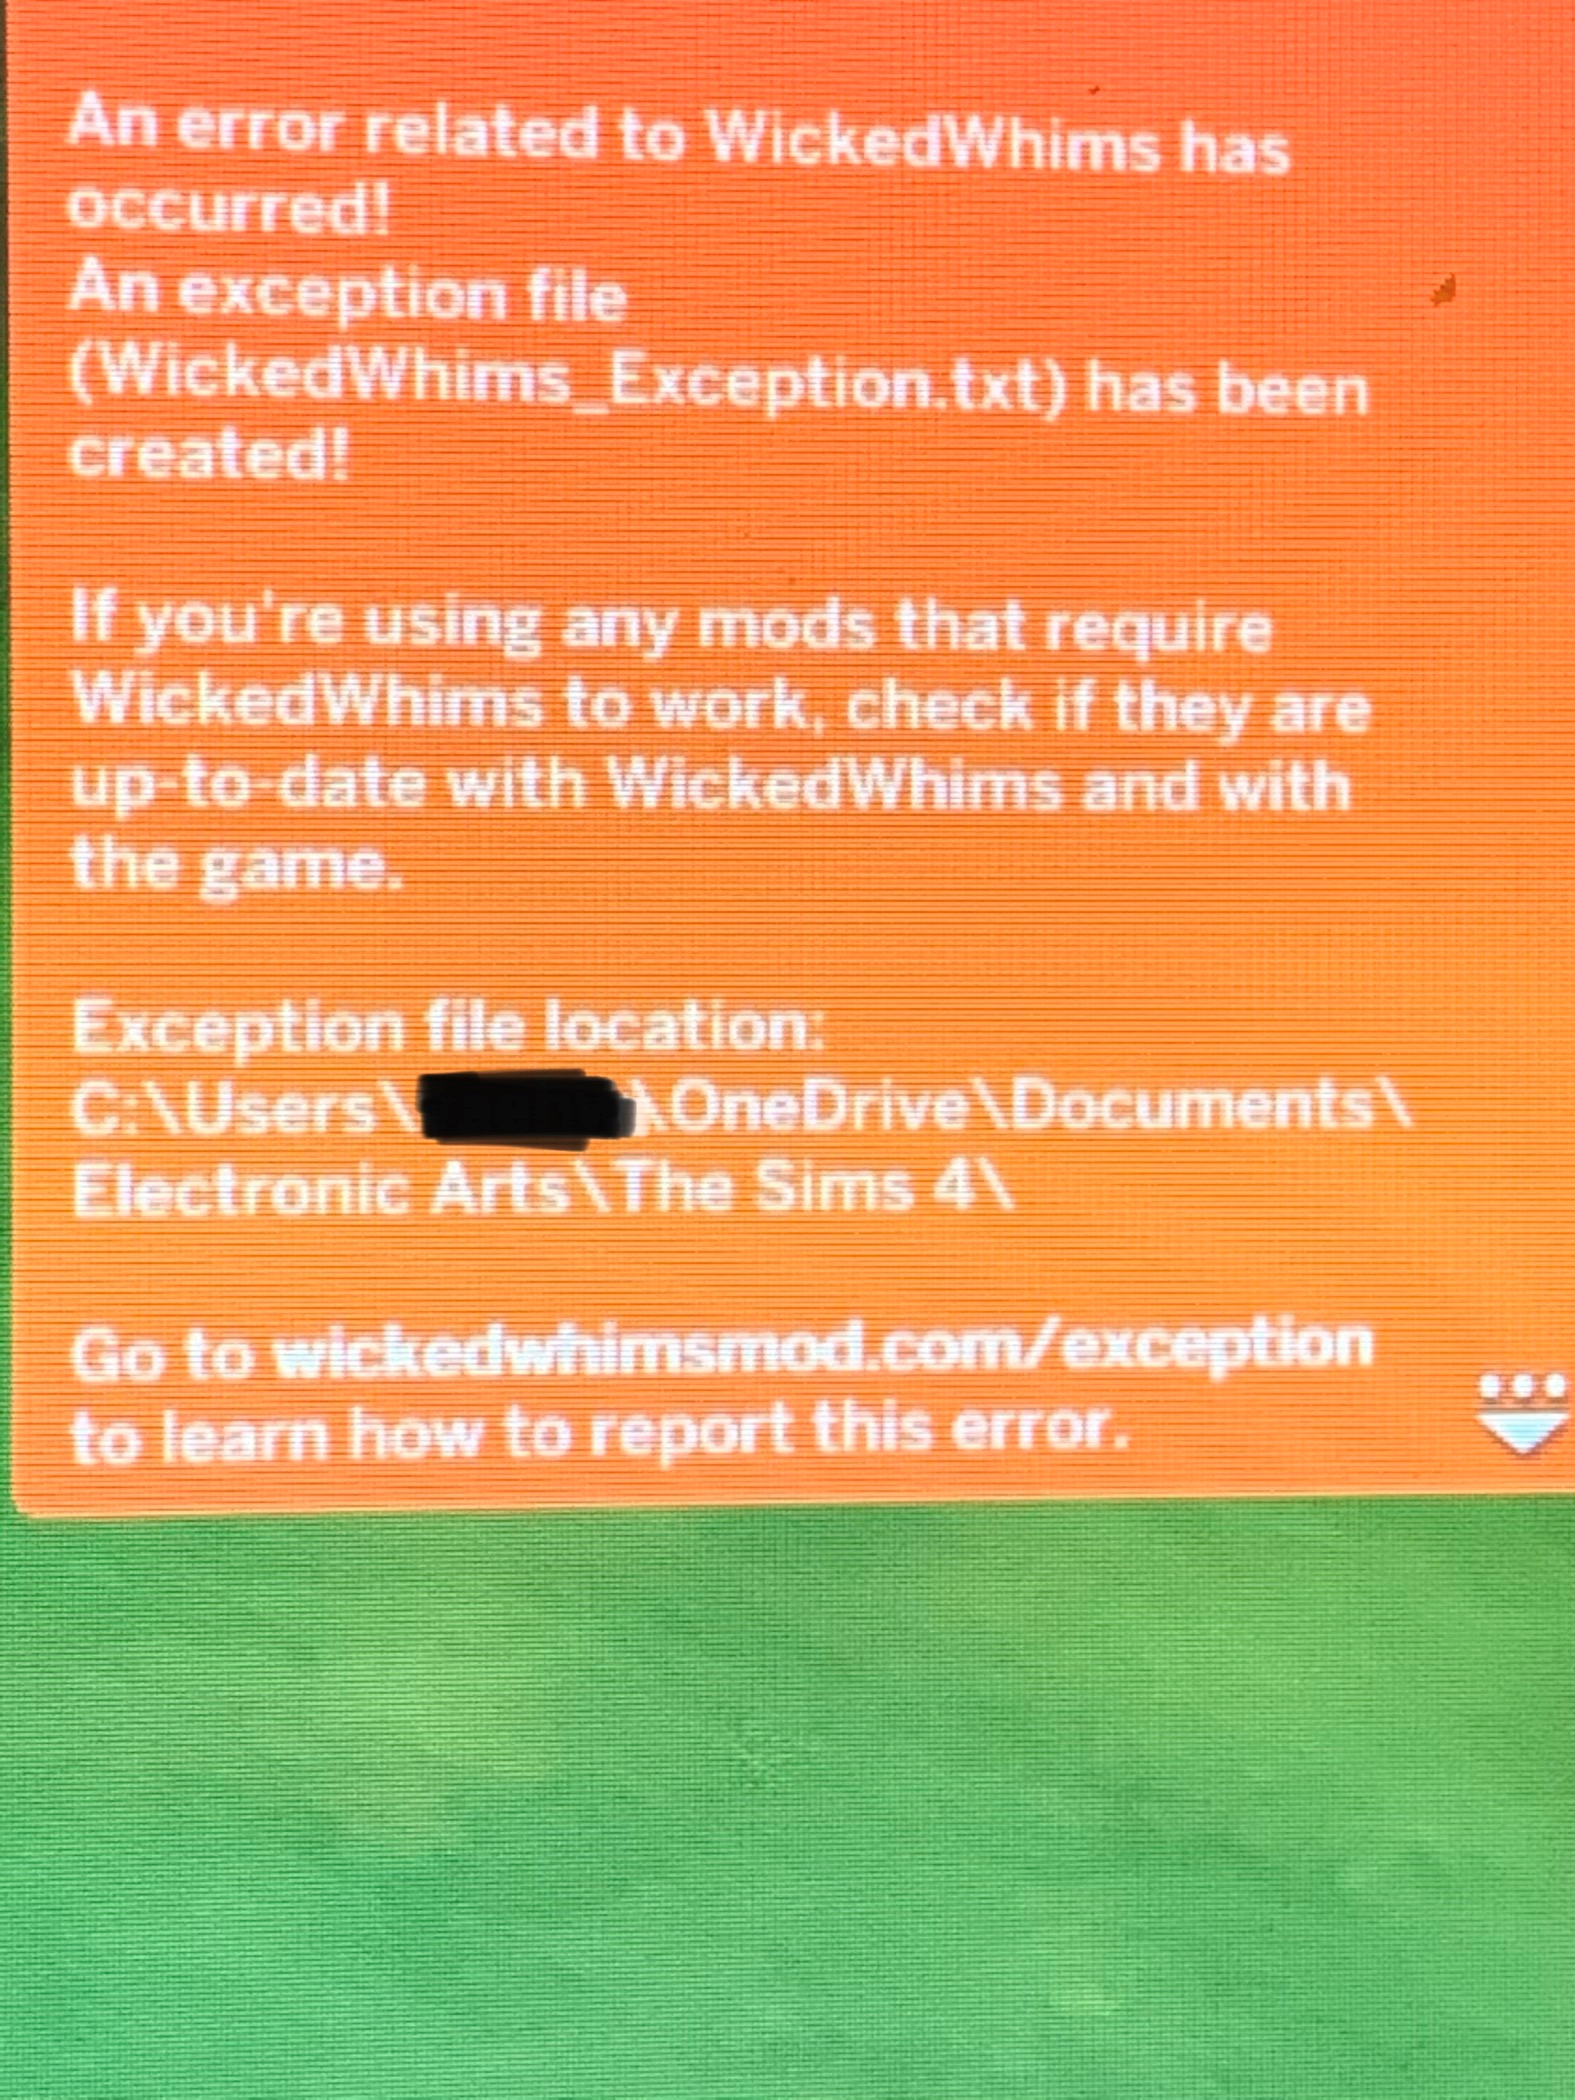 Ошибка wickedwhims_exception.txt. Wicked whims ошибка. Критическая ошибка wickedwhims. Wickedwhims ошибка exception.